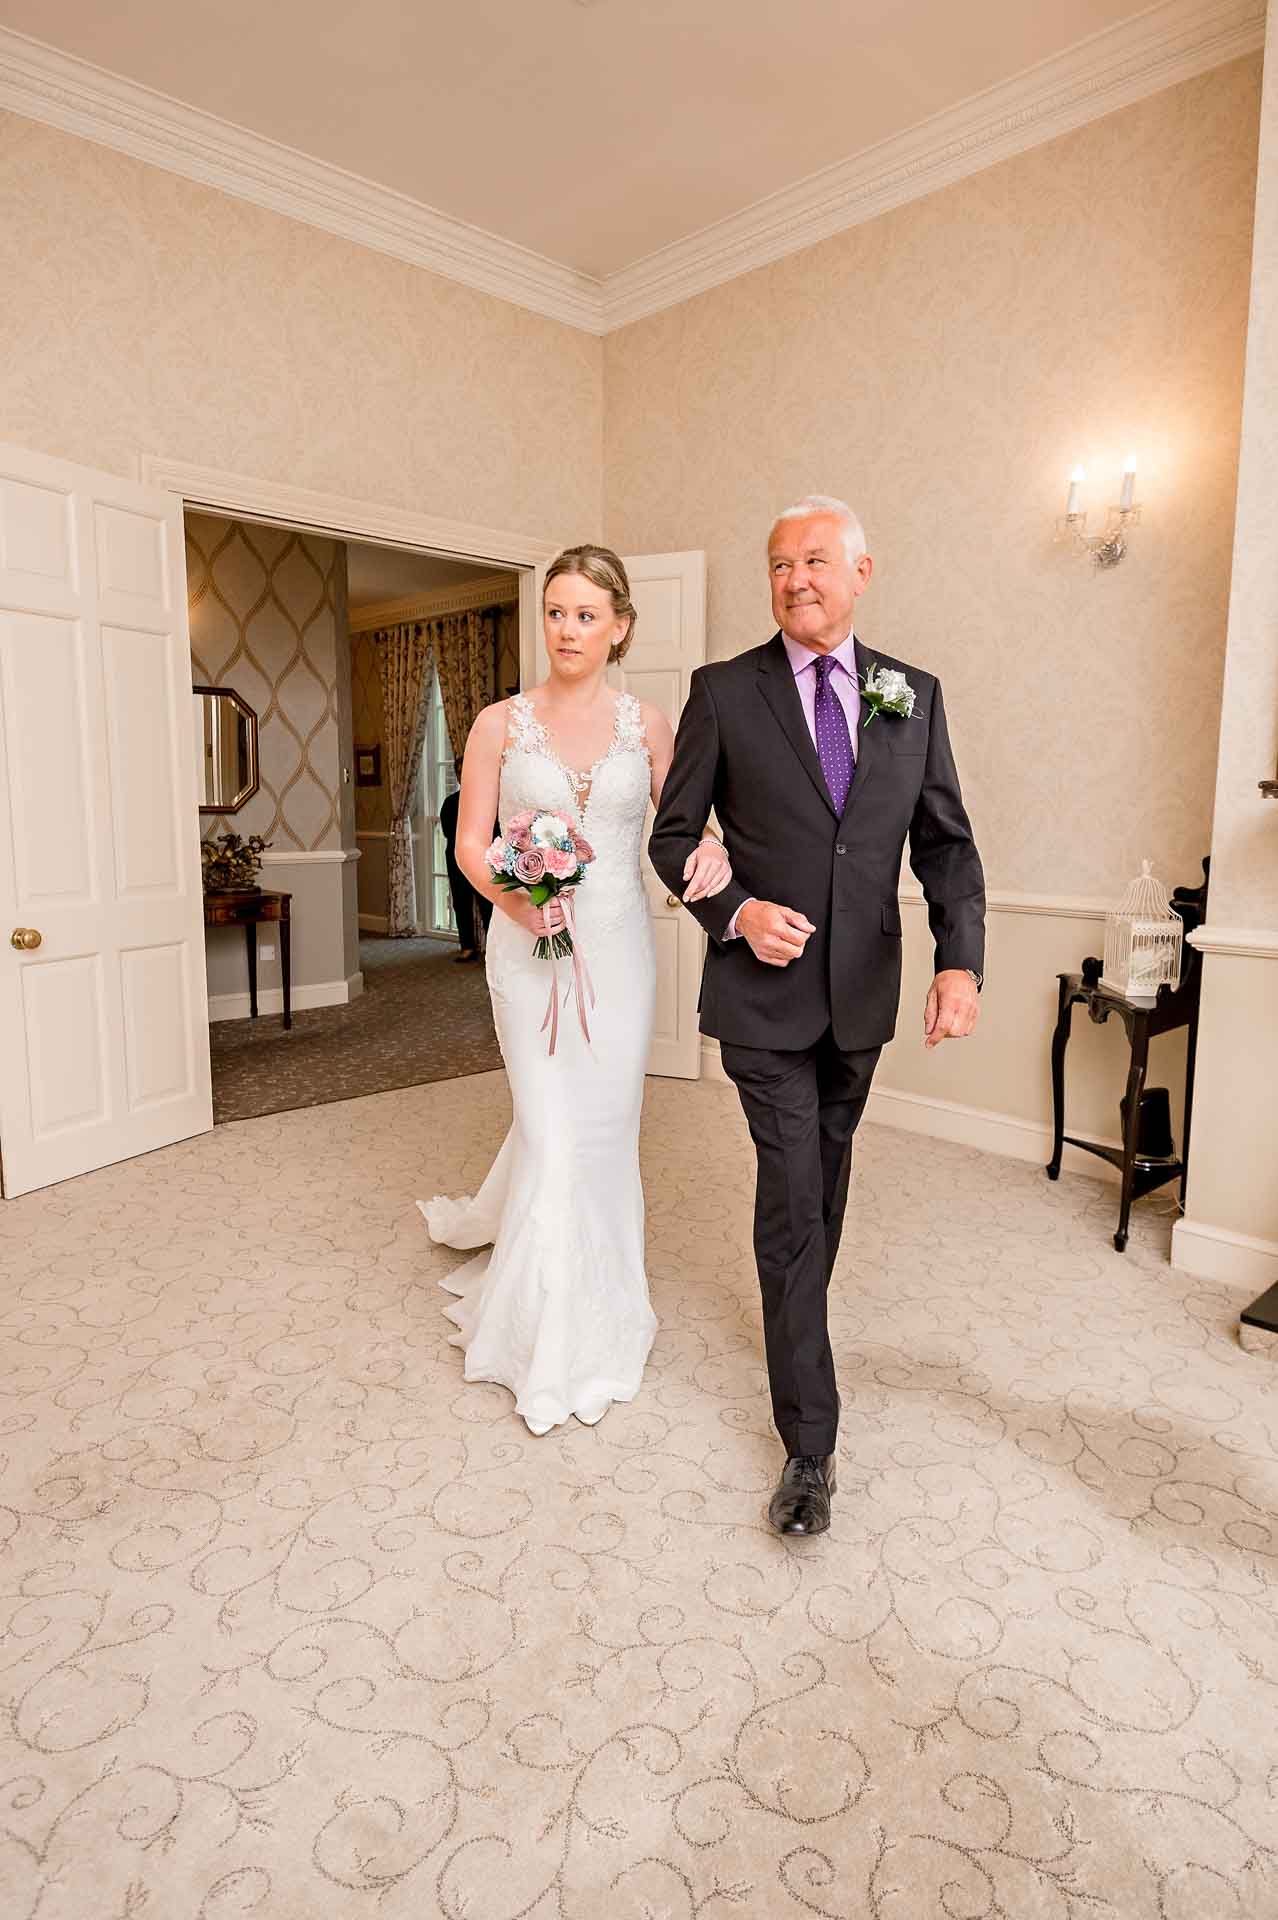 Bride with father walks into ceremony room